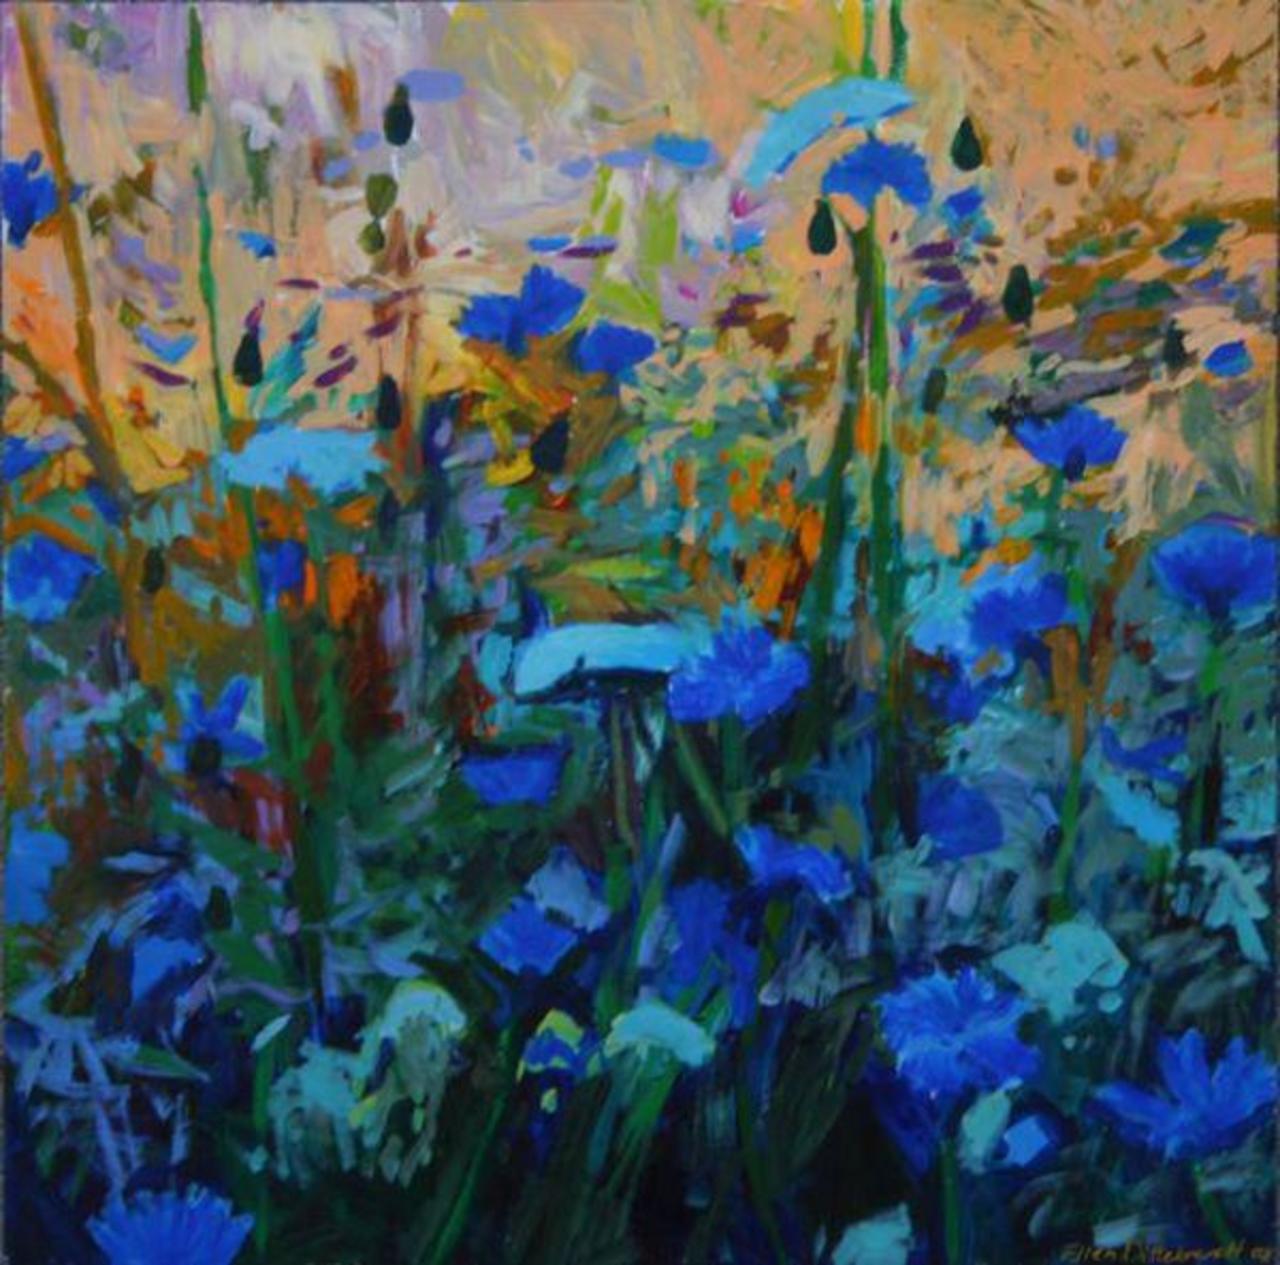 This is such a beautiful piece of art. The colours are vibrant and sumptuous. Landscape artist Ellen Dittebrandt. http://t.co/VQOapaGC2q